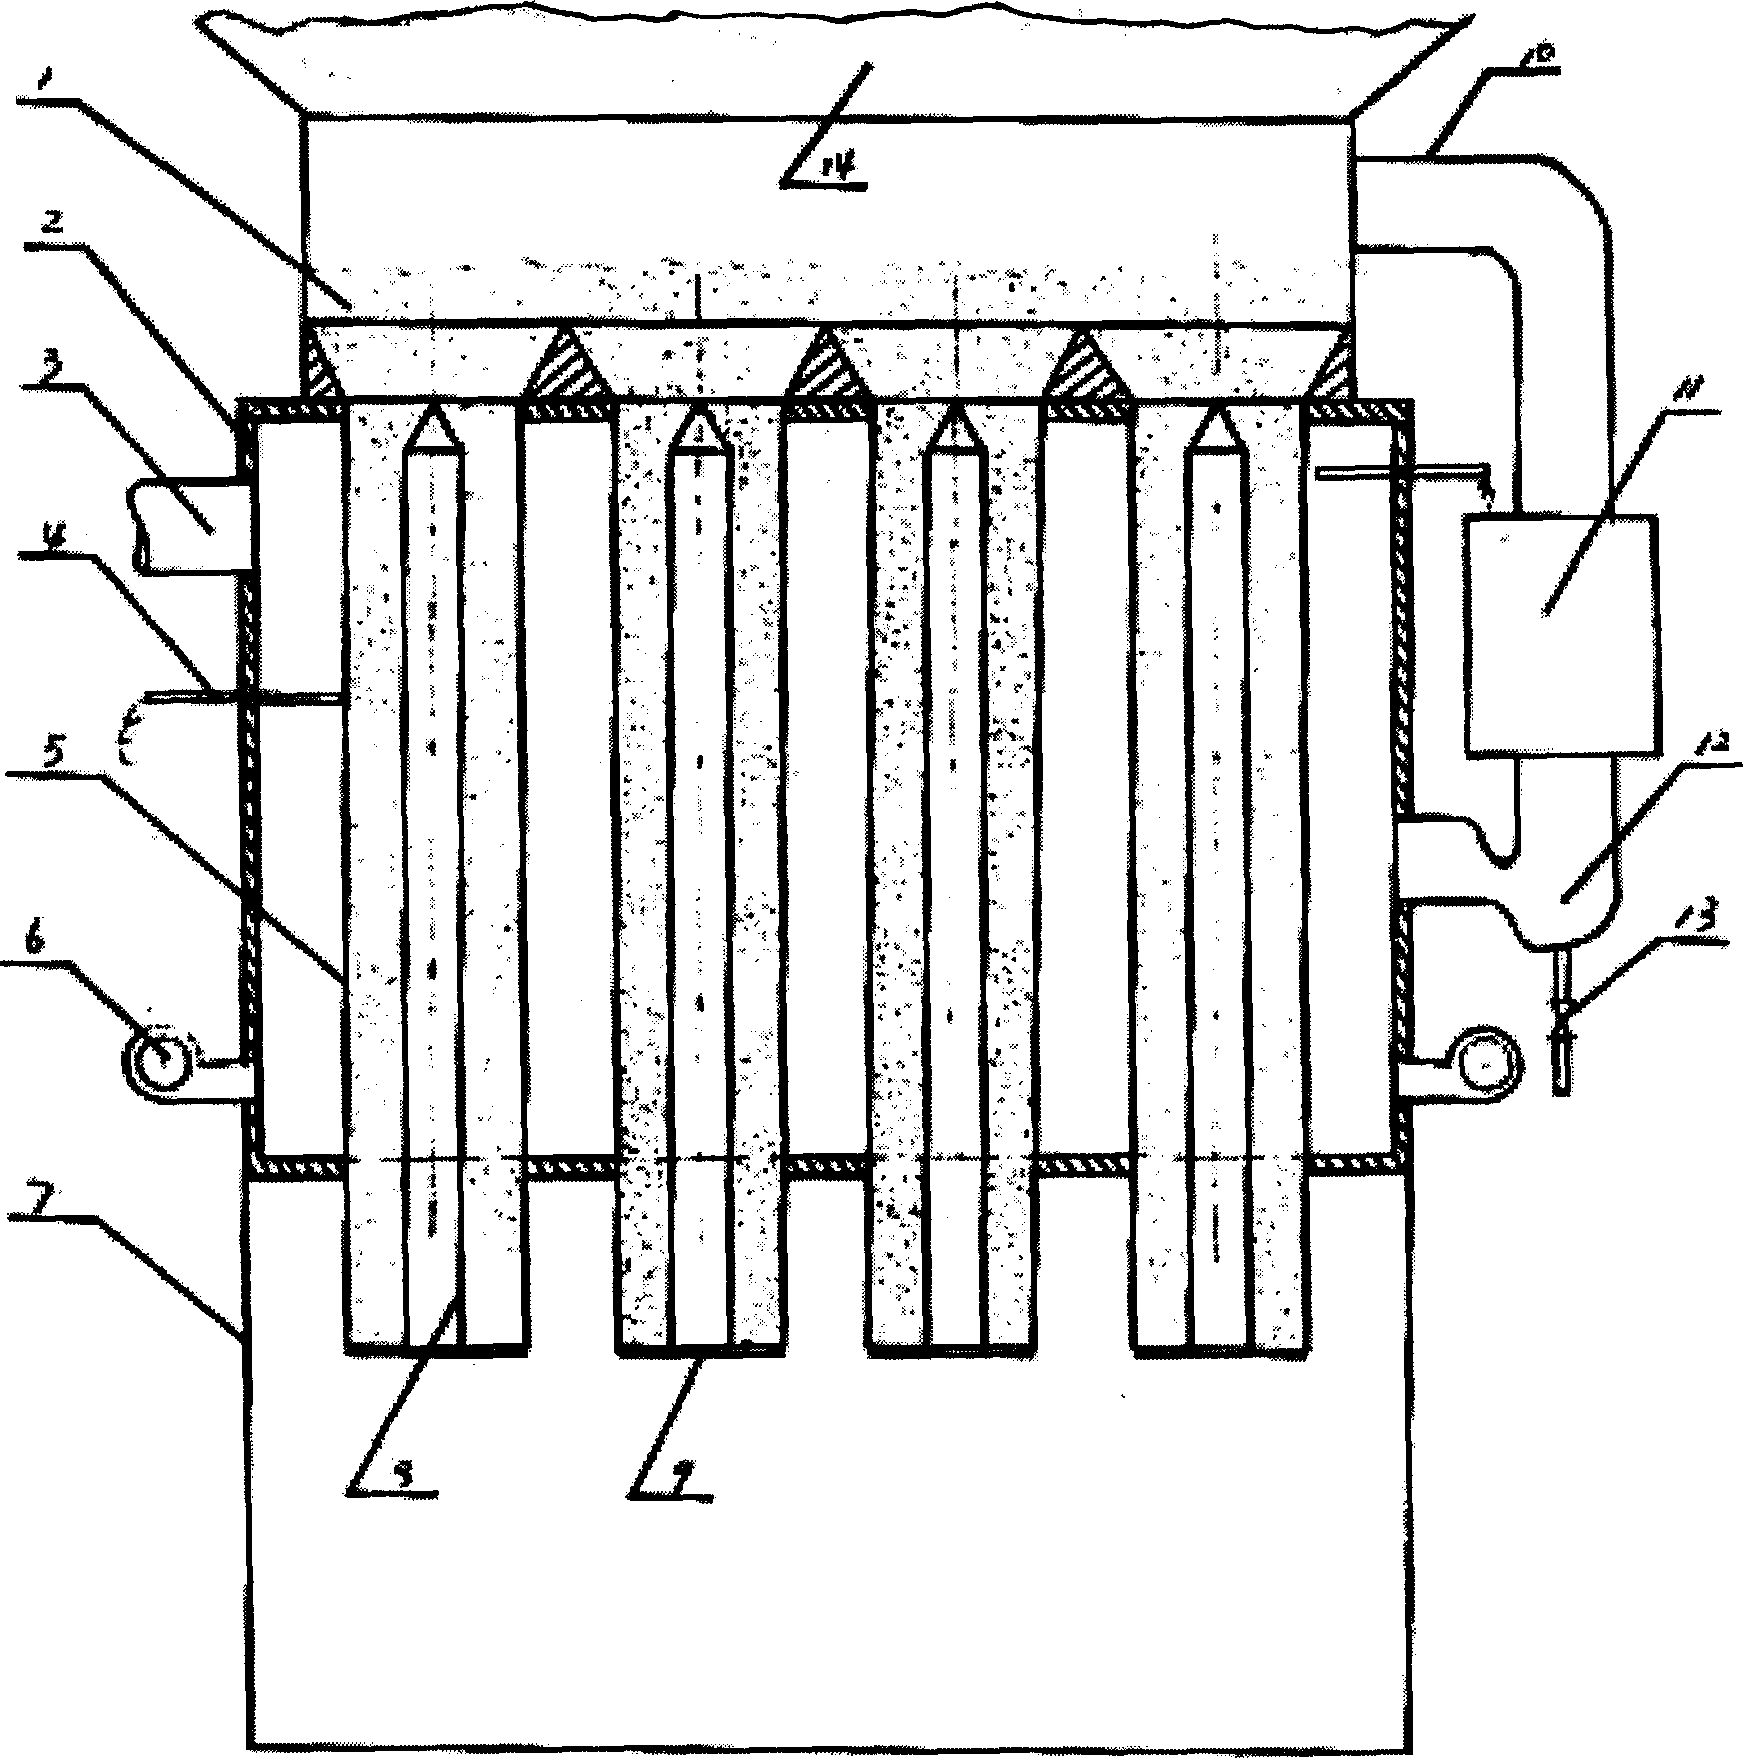 Process and apparatus for preparing high-purity silicon dioxide by utilizing rice hull